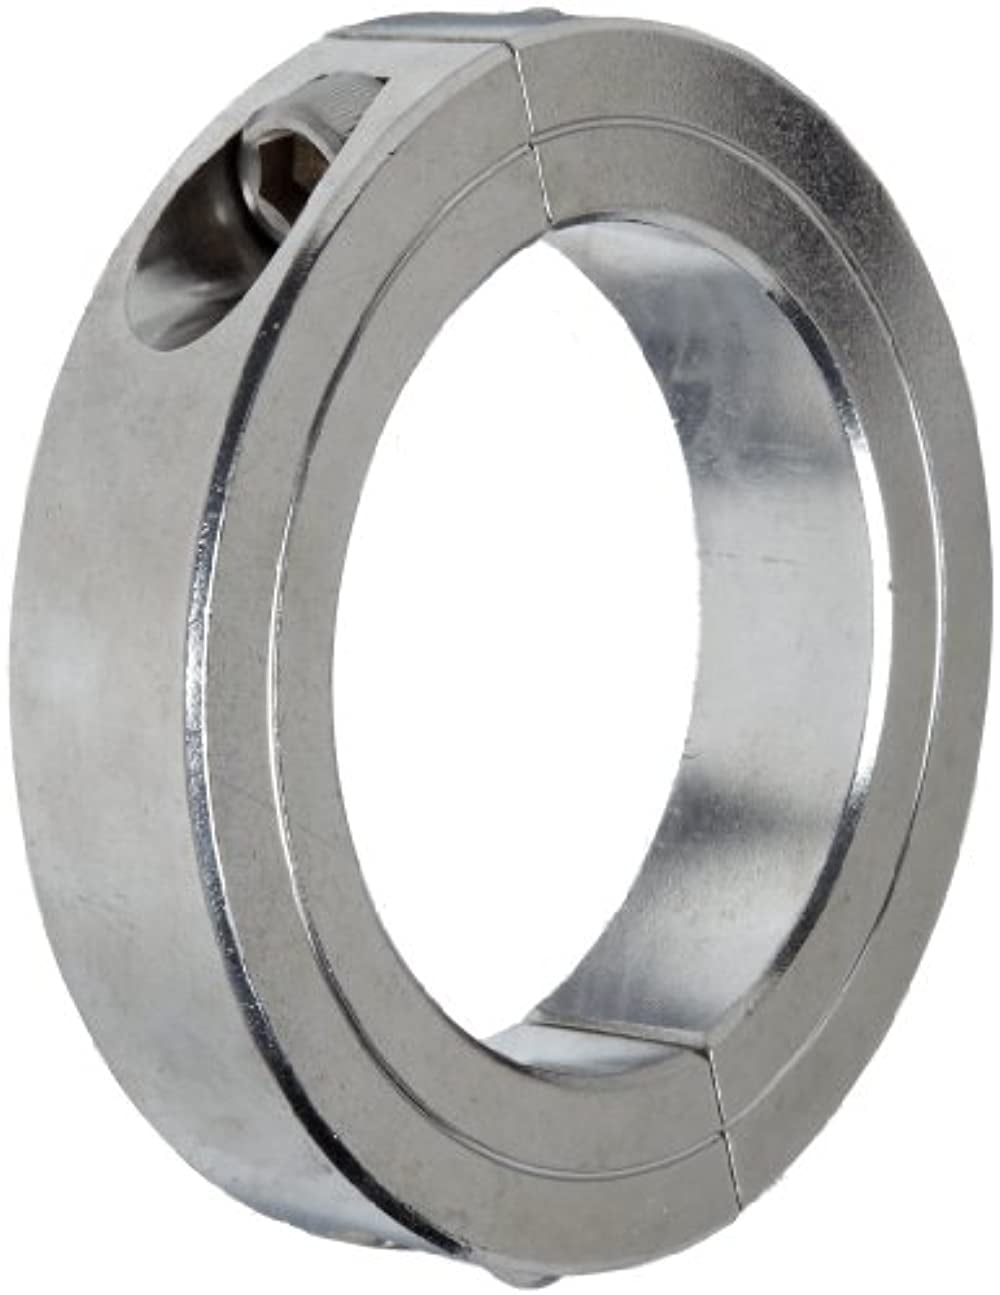 Ruland CL-22-A Whittet-Higins CC-22A Lightweight Clamping Shaft Collar Replaces Climax 1C-137-A Self-Locking H1C-137-A Stafford 1A106 7A106, 1.375 Bore